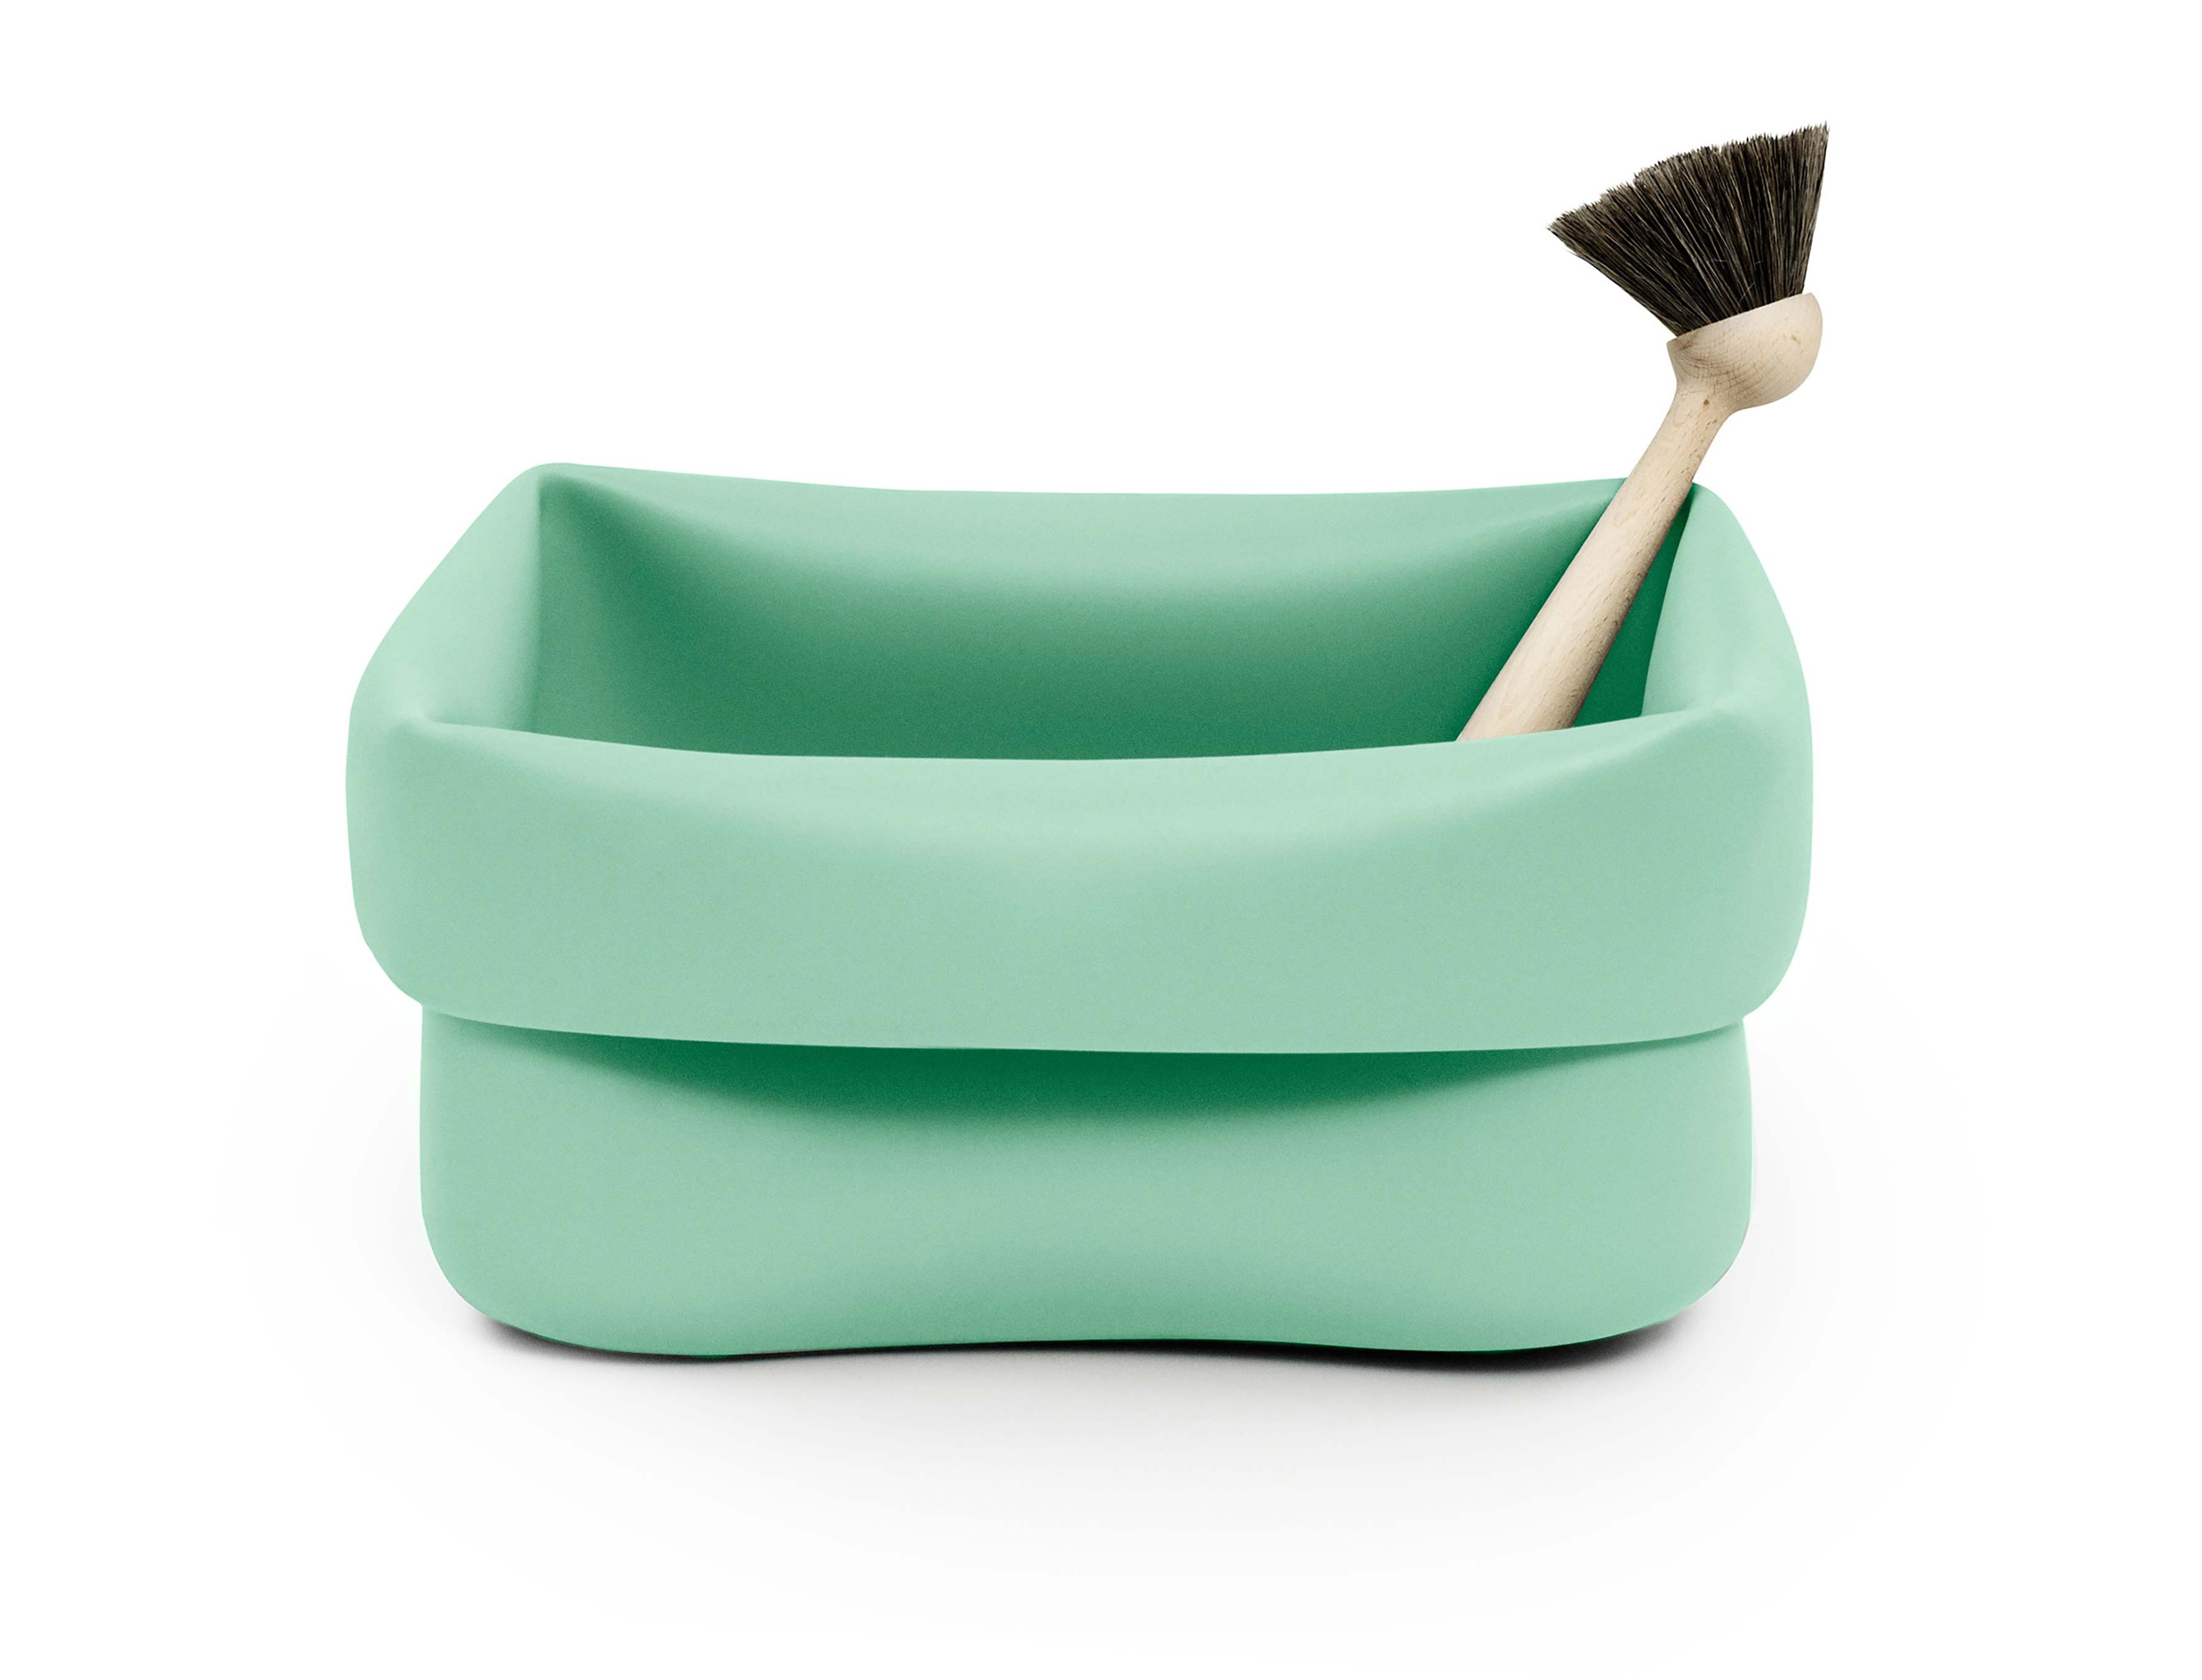 <p>Ole Jensen (born 1958)<br />
Manufactured by Normann Copenhagen (est 1999)</p>

<p><em>Washing-up Bowl and Brush</em></p>

<p>1996 (designed), rubber, beech, natural bristles<br />
on loan from the Designmuseum Danmark</p>

<p>With the <em>Washing-up Bowl and Brush</em> Ole Jensen takes a mundane, unglamorous household task and transforms it into a playful, vibrant and sensuous design experience. Jensen&rsquo;s washing-up bowl is a bold, sculptural embrace of functionality. Made from synthetic rubber, the material is pleasant to touch, water-resistant and reduces the clanging sound of rattling dishes. Although the scrubbing brush signals its intended use, the washing bowl has multiple potential uses: toy basket, a footbath, a pot for flowers, or, in the case of the Museum of Modern Art in New York, a champagne cooler.</p>